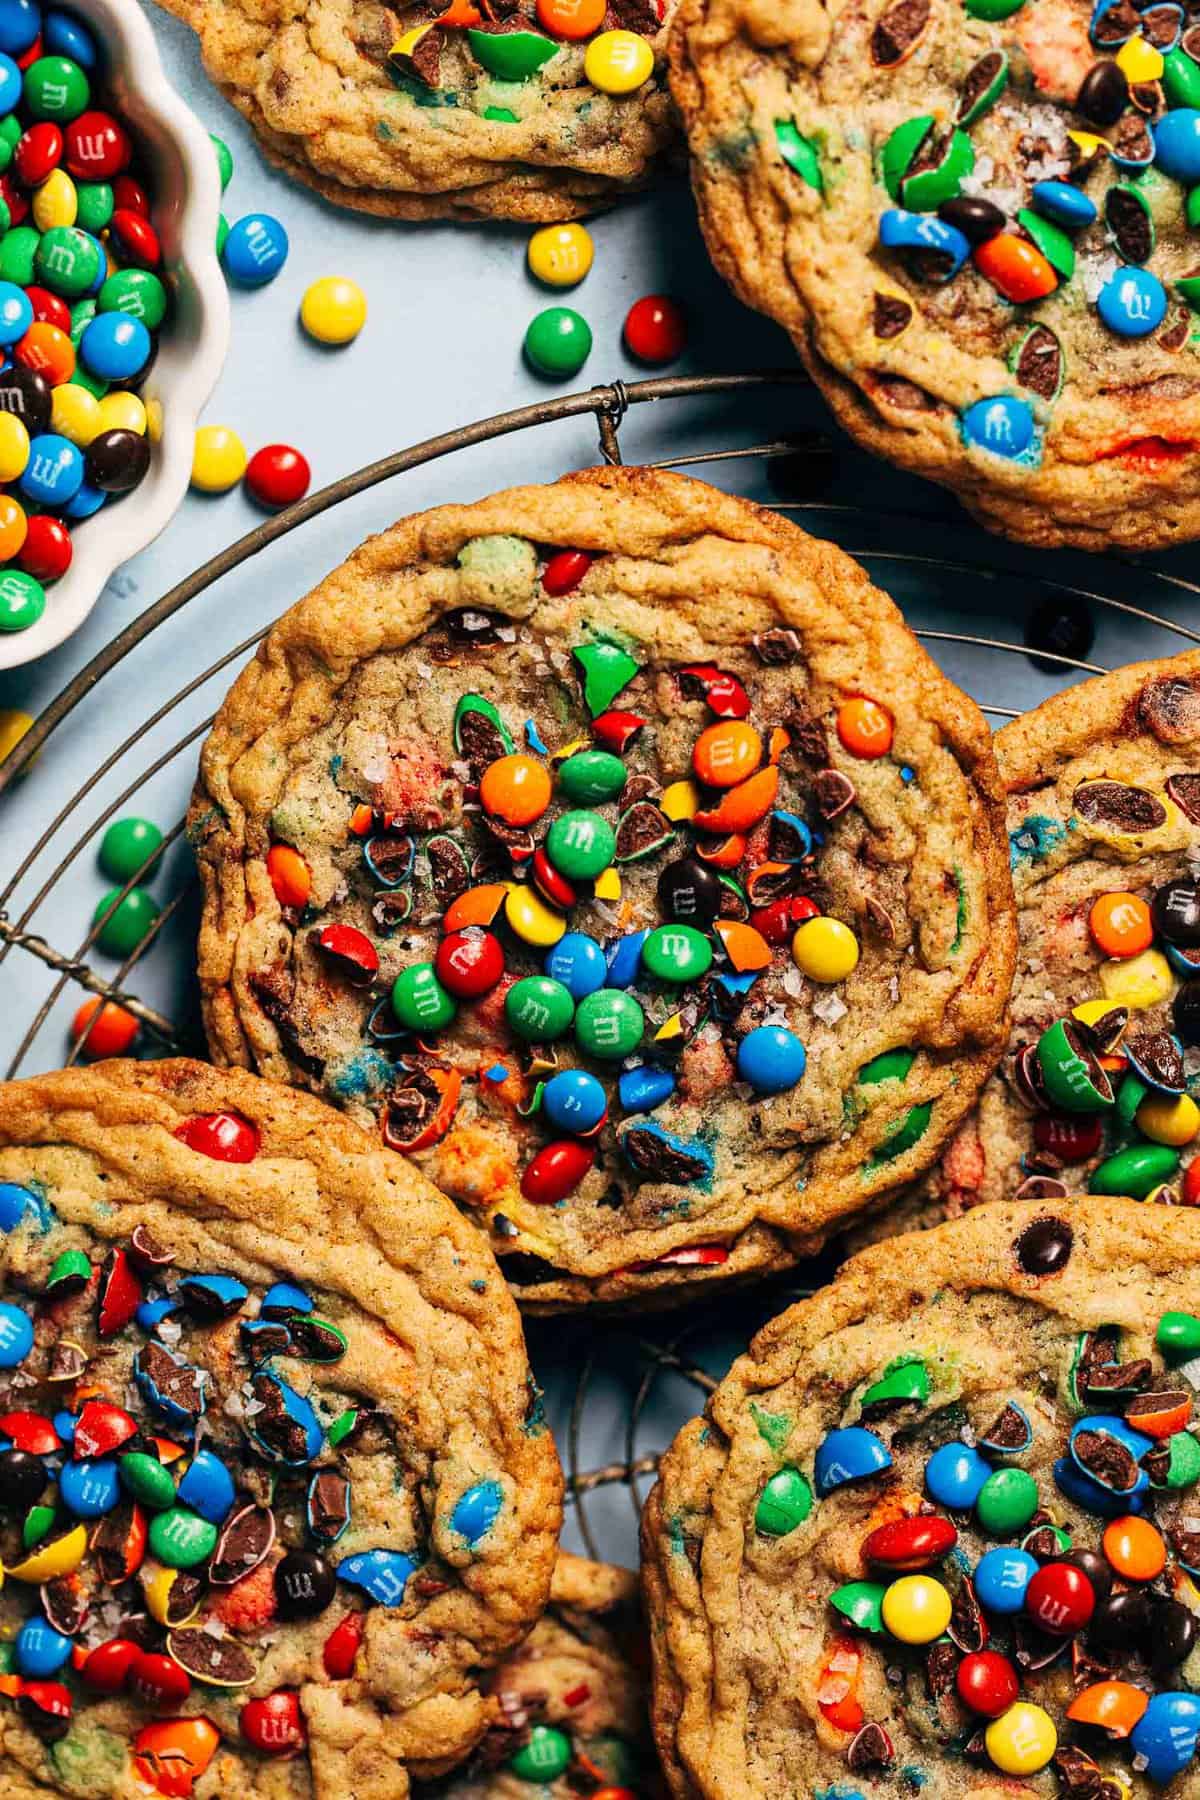 Crispy Chocolate Chip Cookies with M&M's - Style Sweet